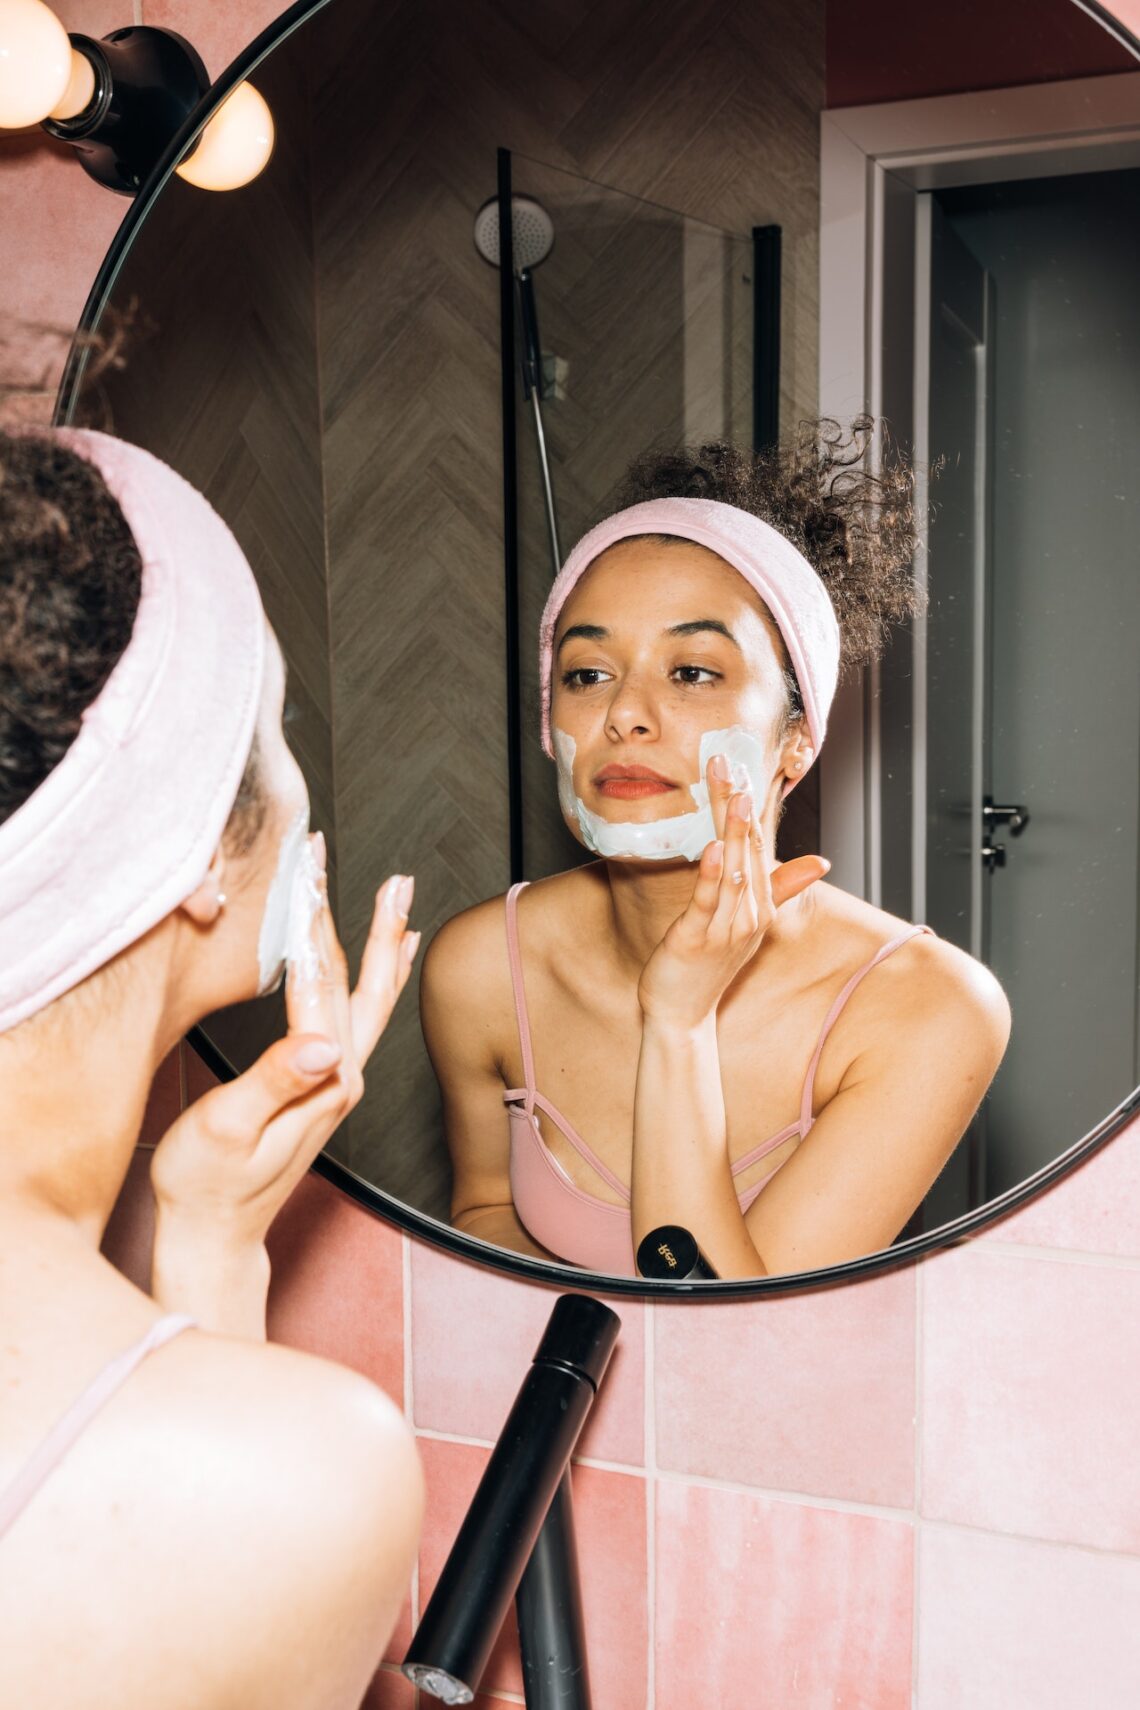 Skincare mistakes, Over-exfoliating, Sunscreen, Neck and chest care, Makeup removal, Product overload, Skincare mistakes, Skincare routinE, Proper cleansing, Exfoliation, Skincare tips, Skin damage, and the consequences of bad skincare habits.